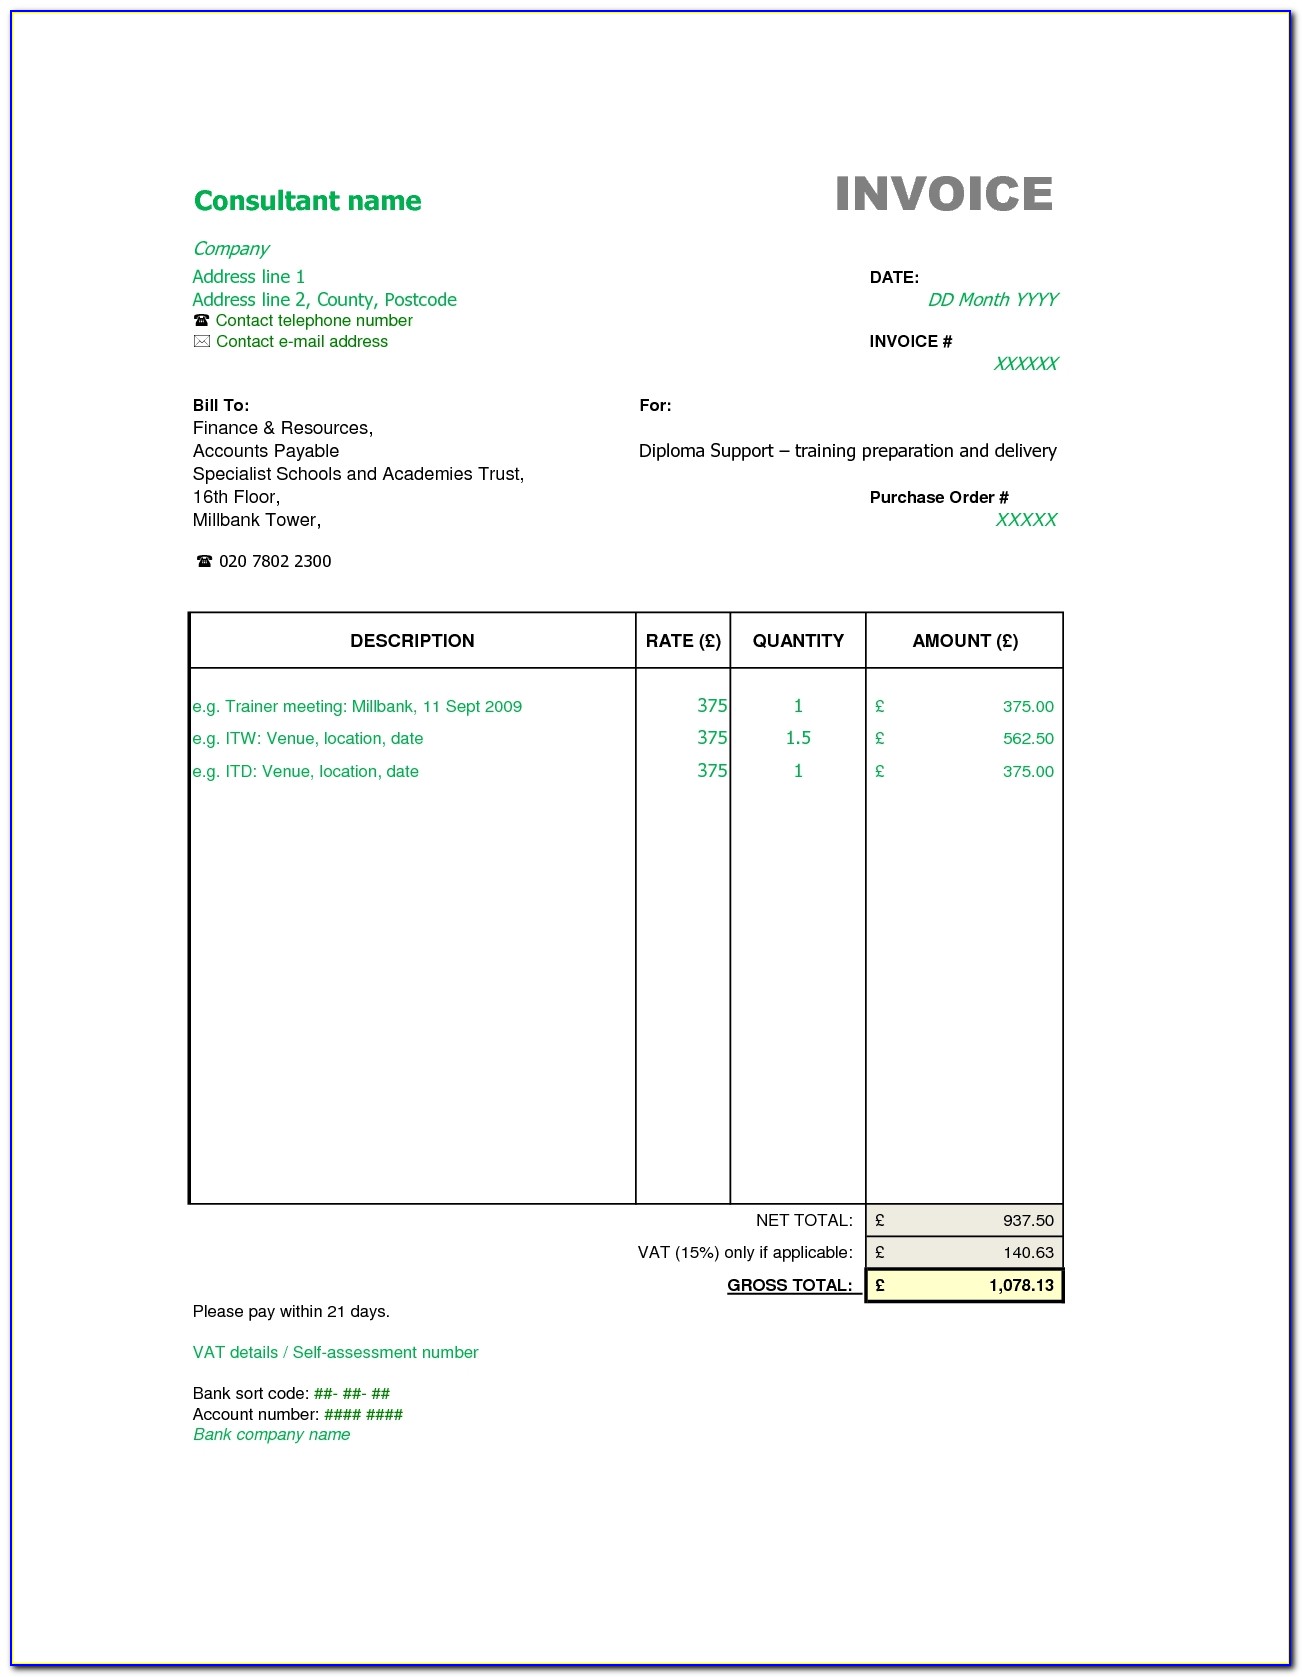 Consulting Services Invoice Invoice Template For Consulting Services Consulting Services 1275 X 1650